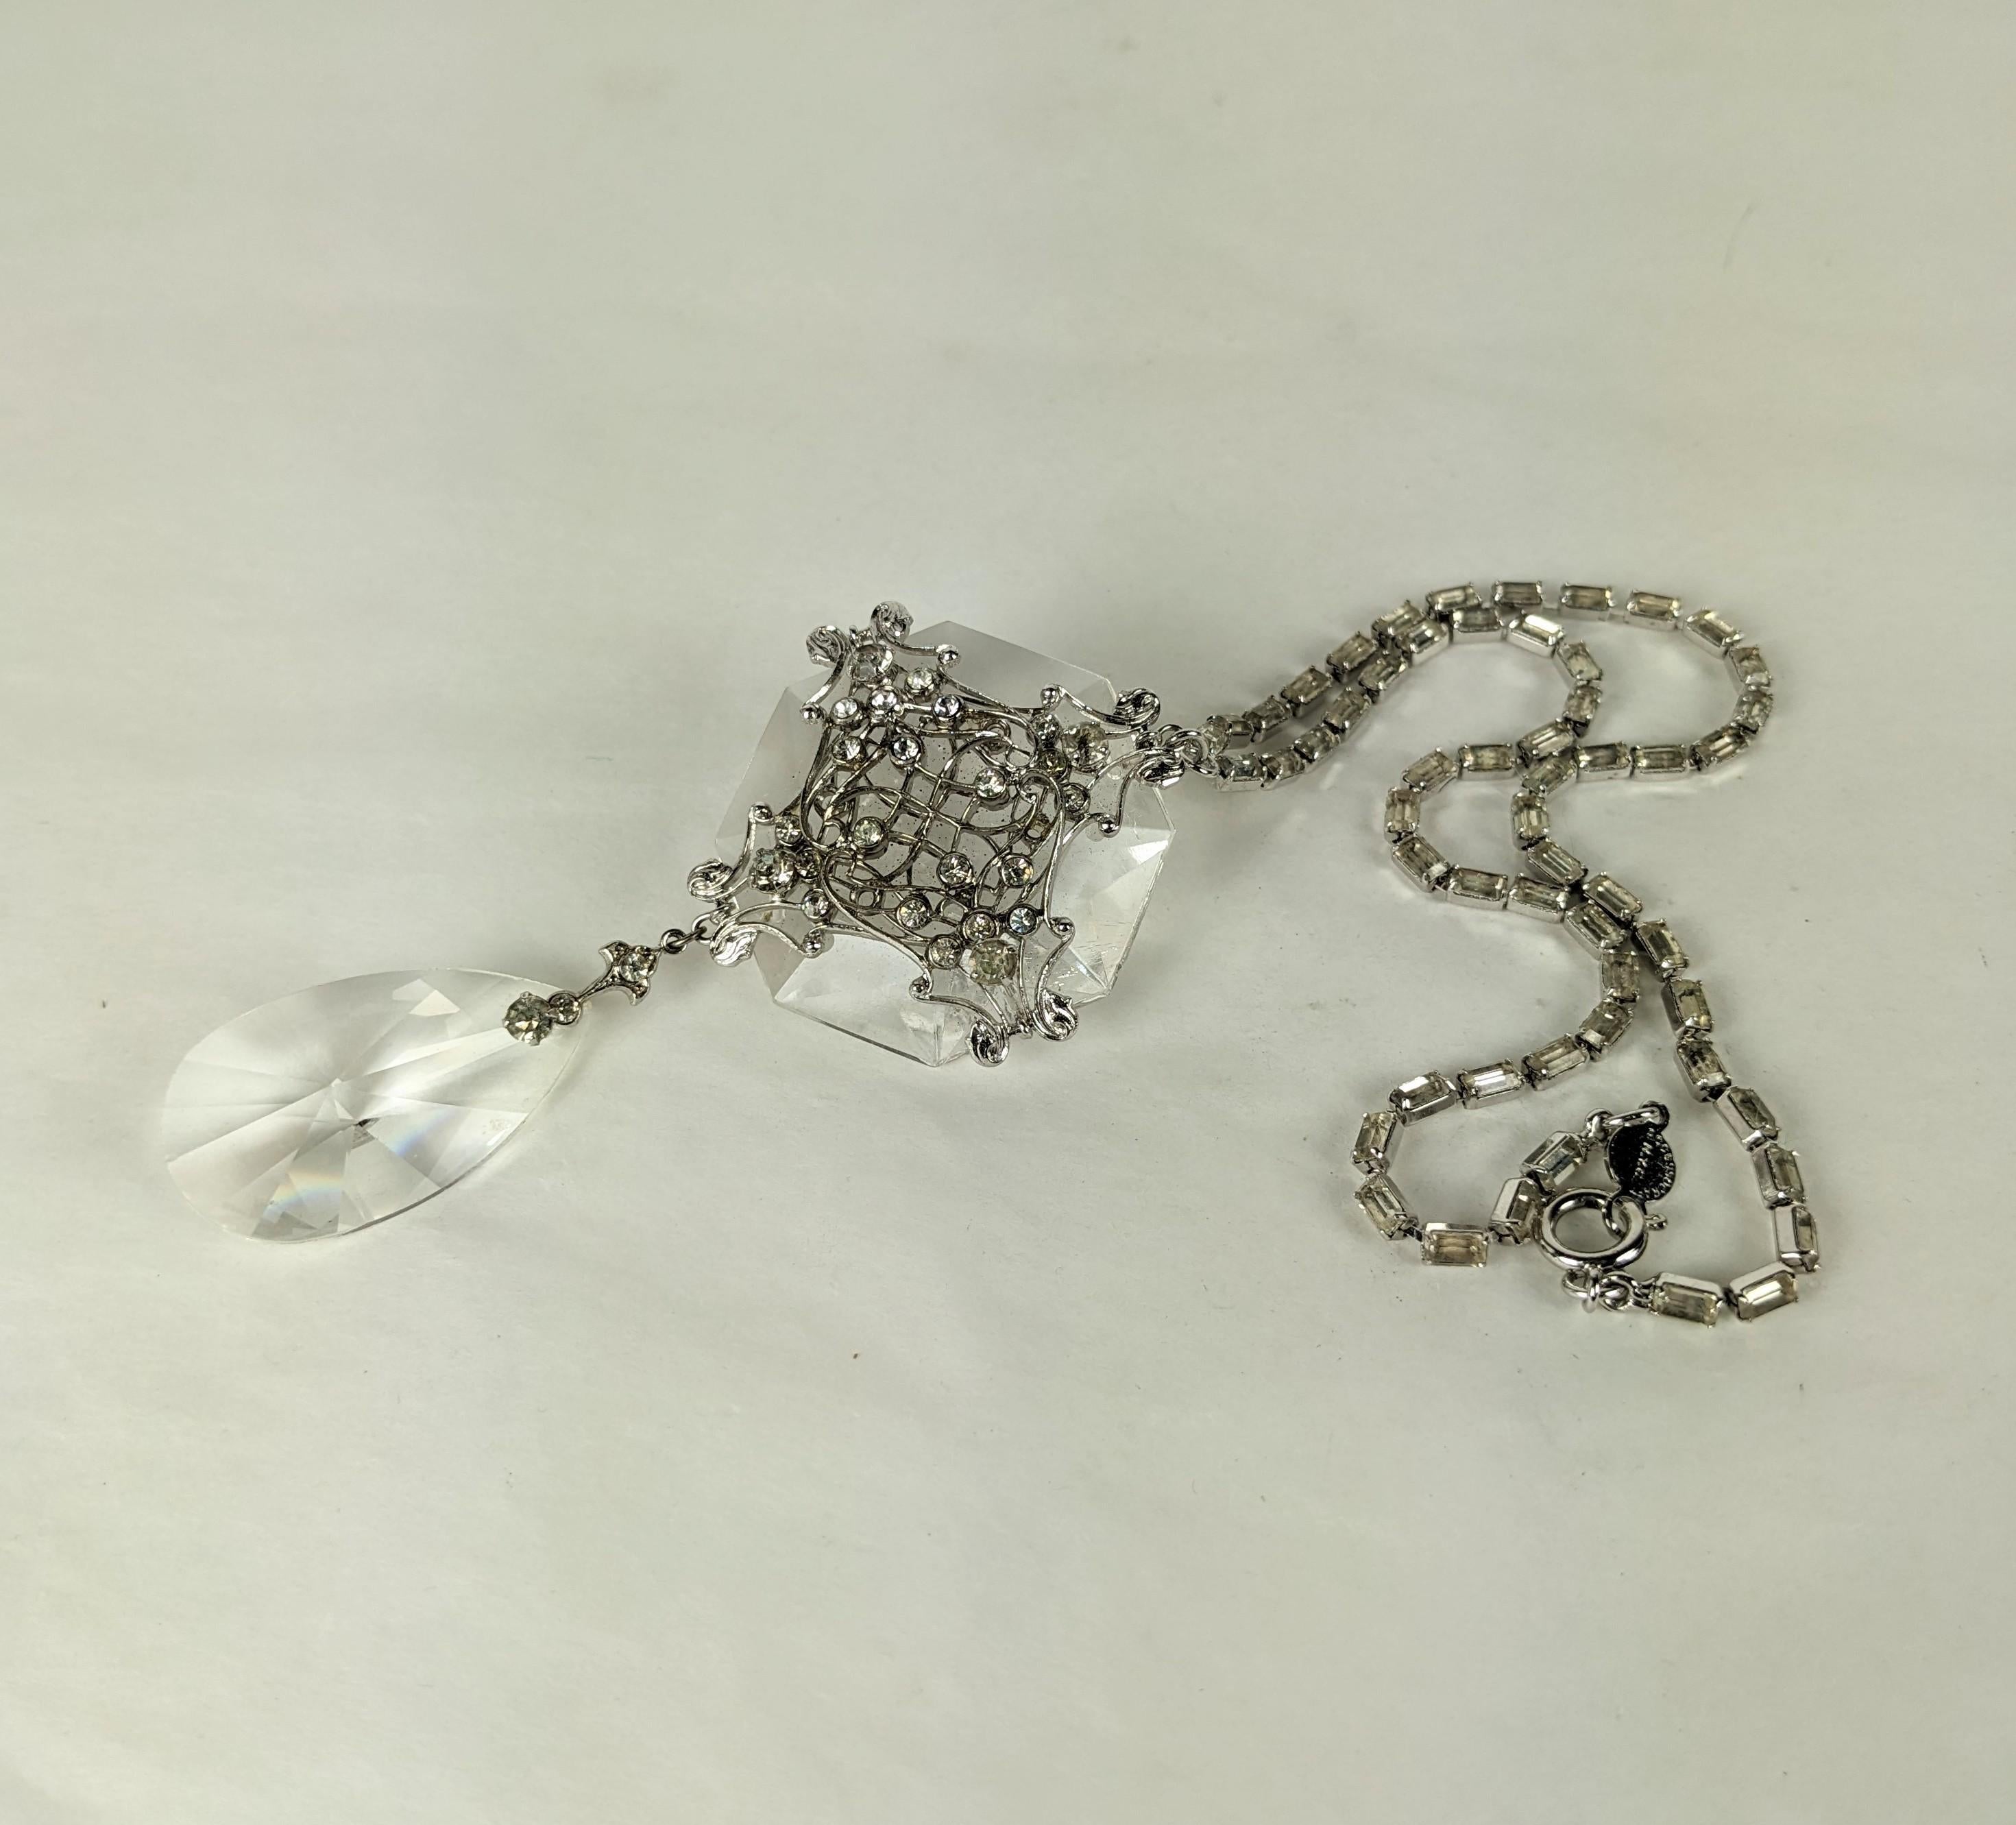 Unusual Chandelier Crystal Pendant by Accessocraft In Excellent Condition For Sale In New York, NY